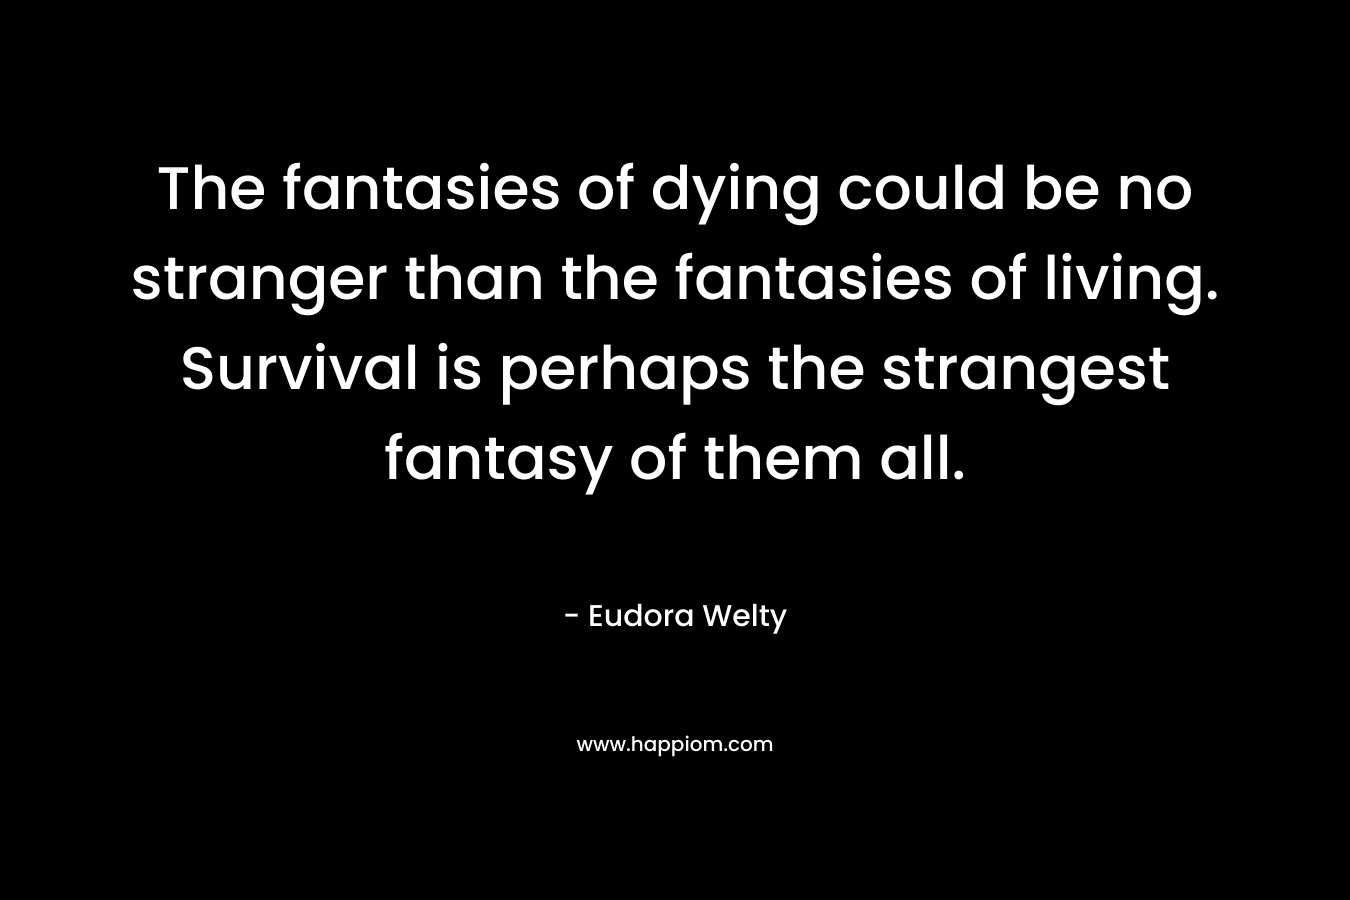 The fantasies of dying could be no stranger than the fantasies of living. Survival is perhaps the strangest fantasy of them all.